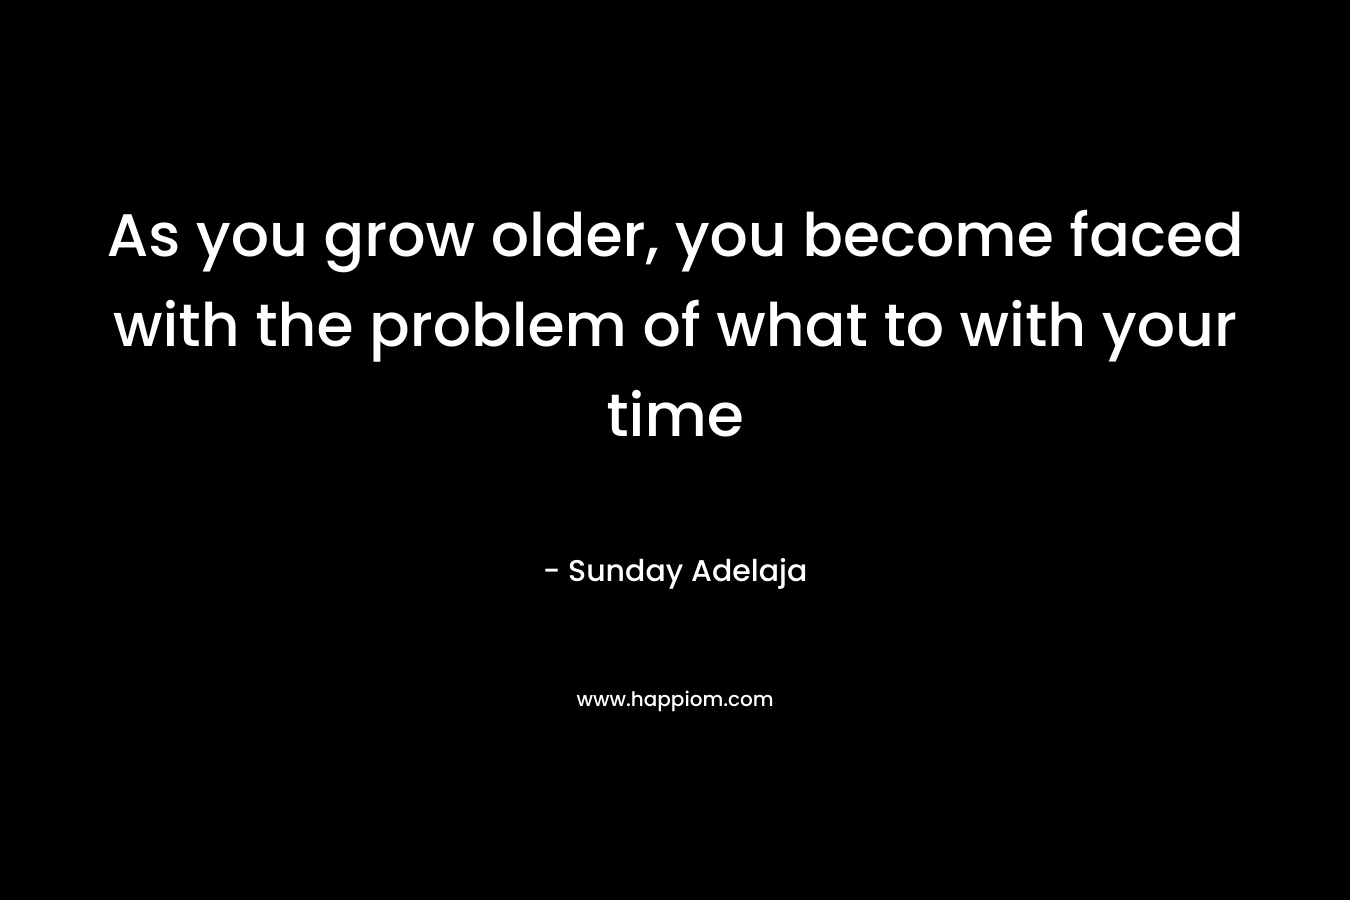 As you grow older, you become faced with the problem of what to with your time